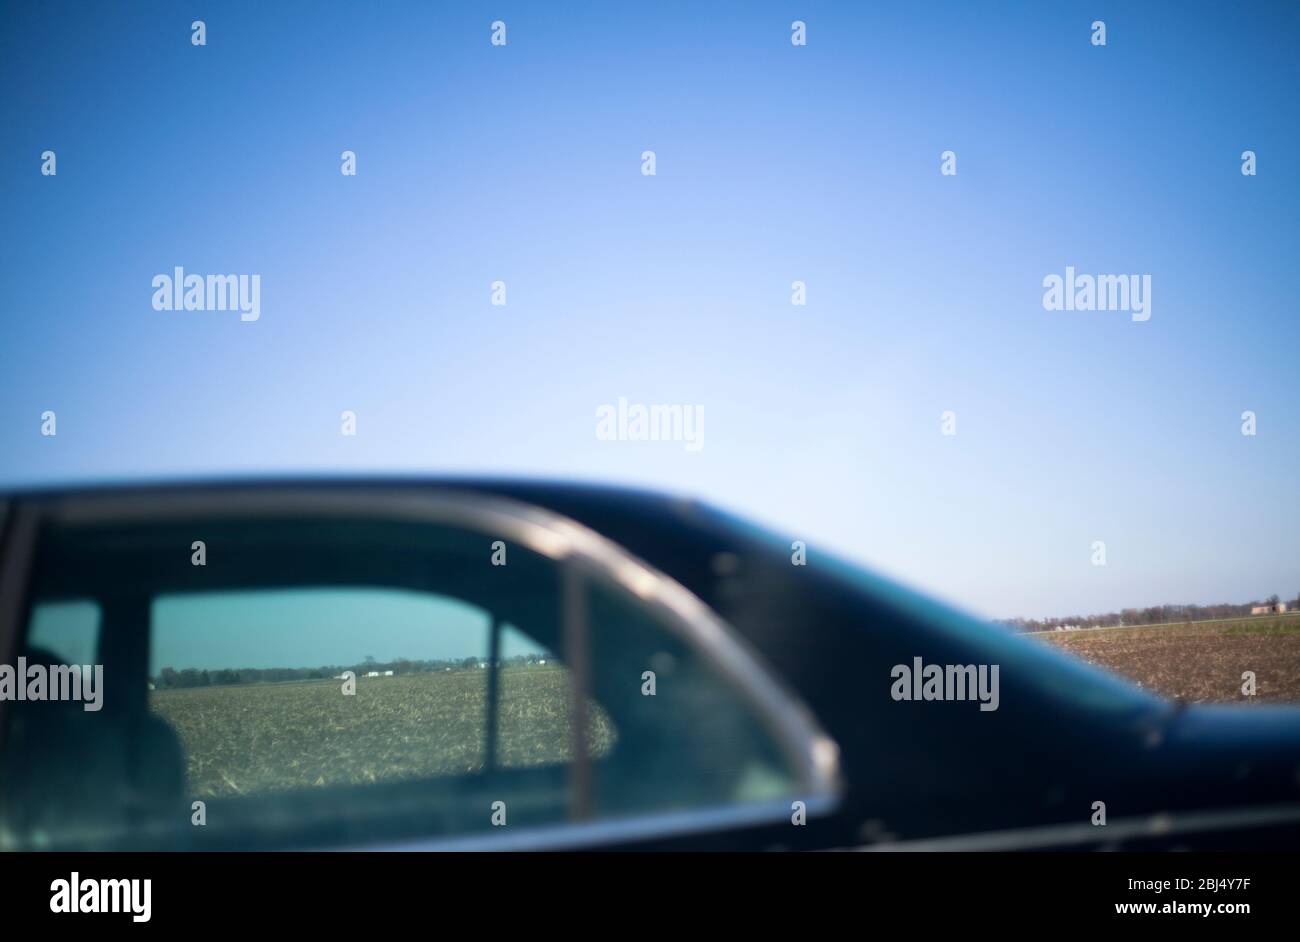 View across a field somewhere in the mid-West of America with a car in the foreground. Stock Photo